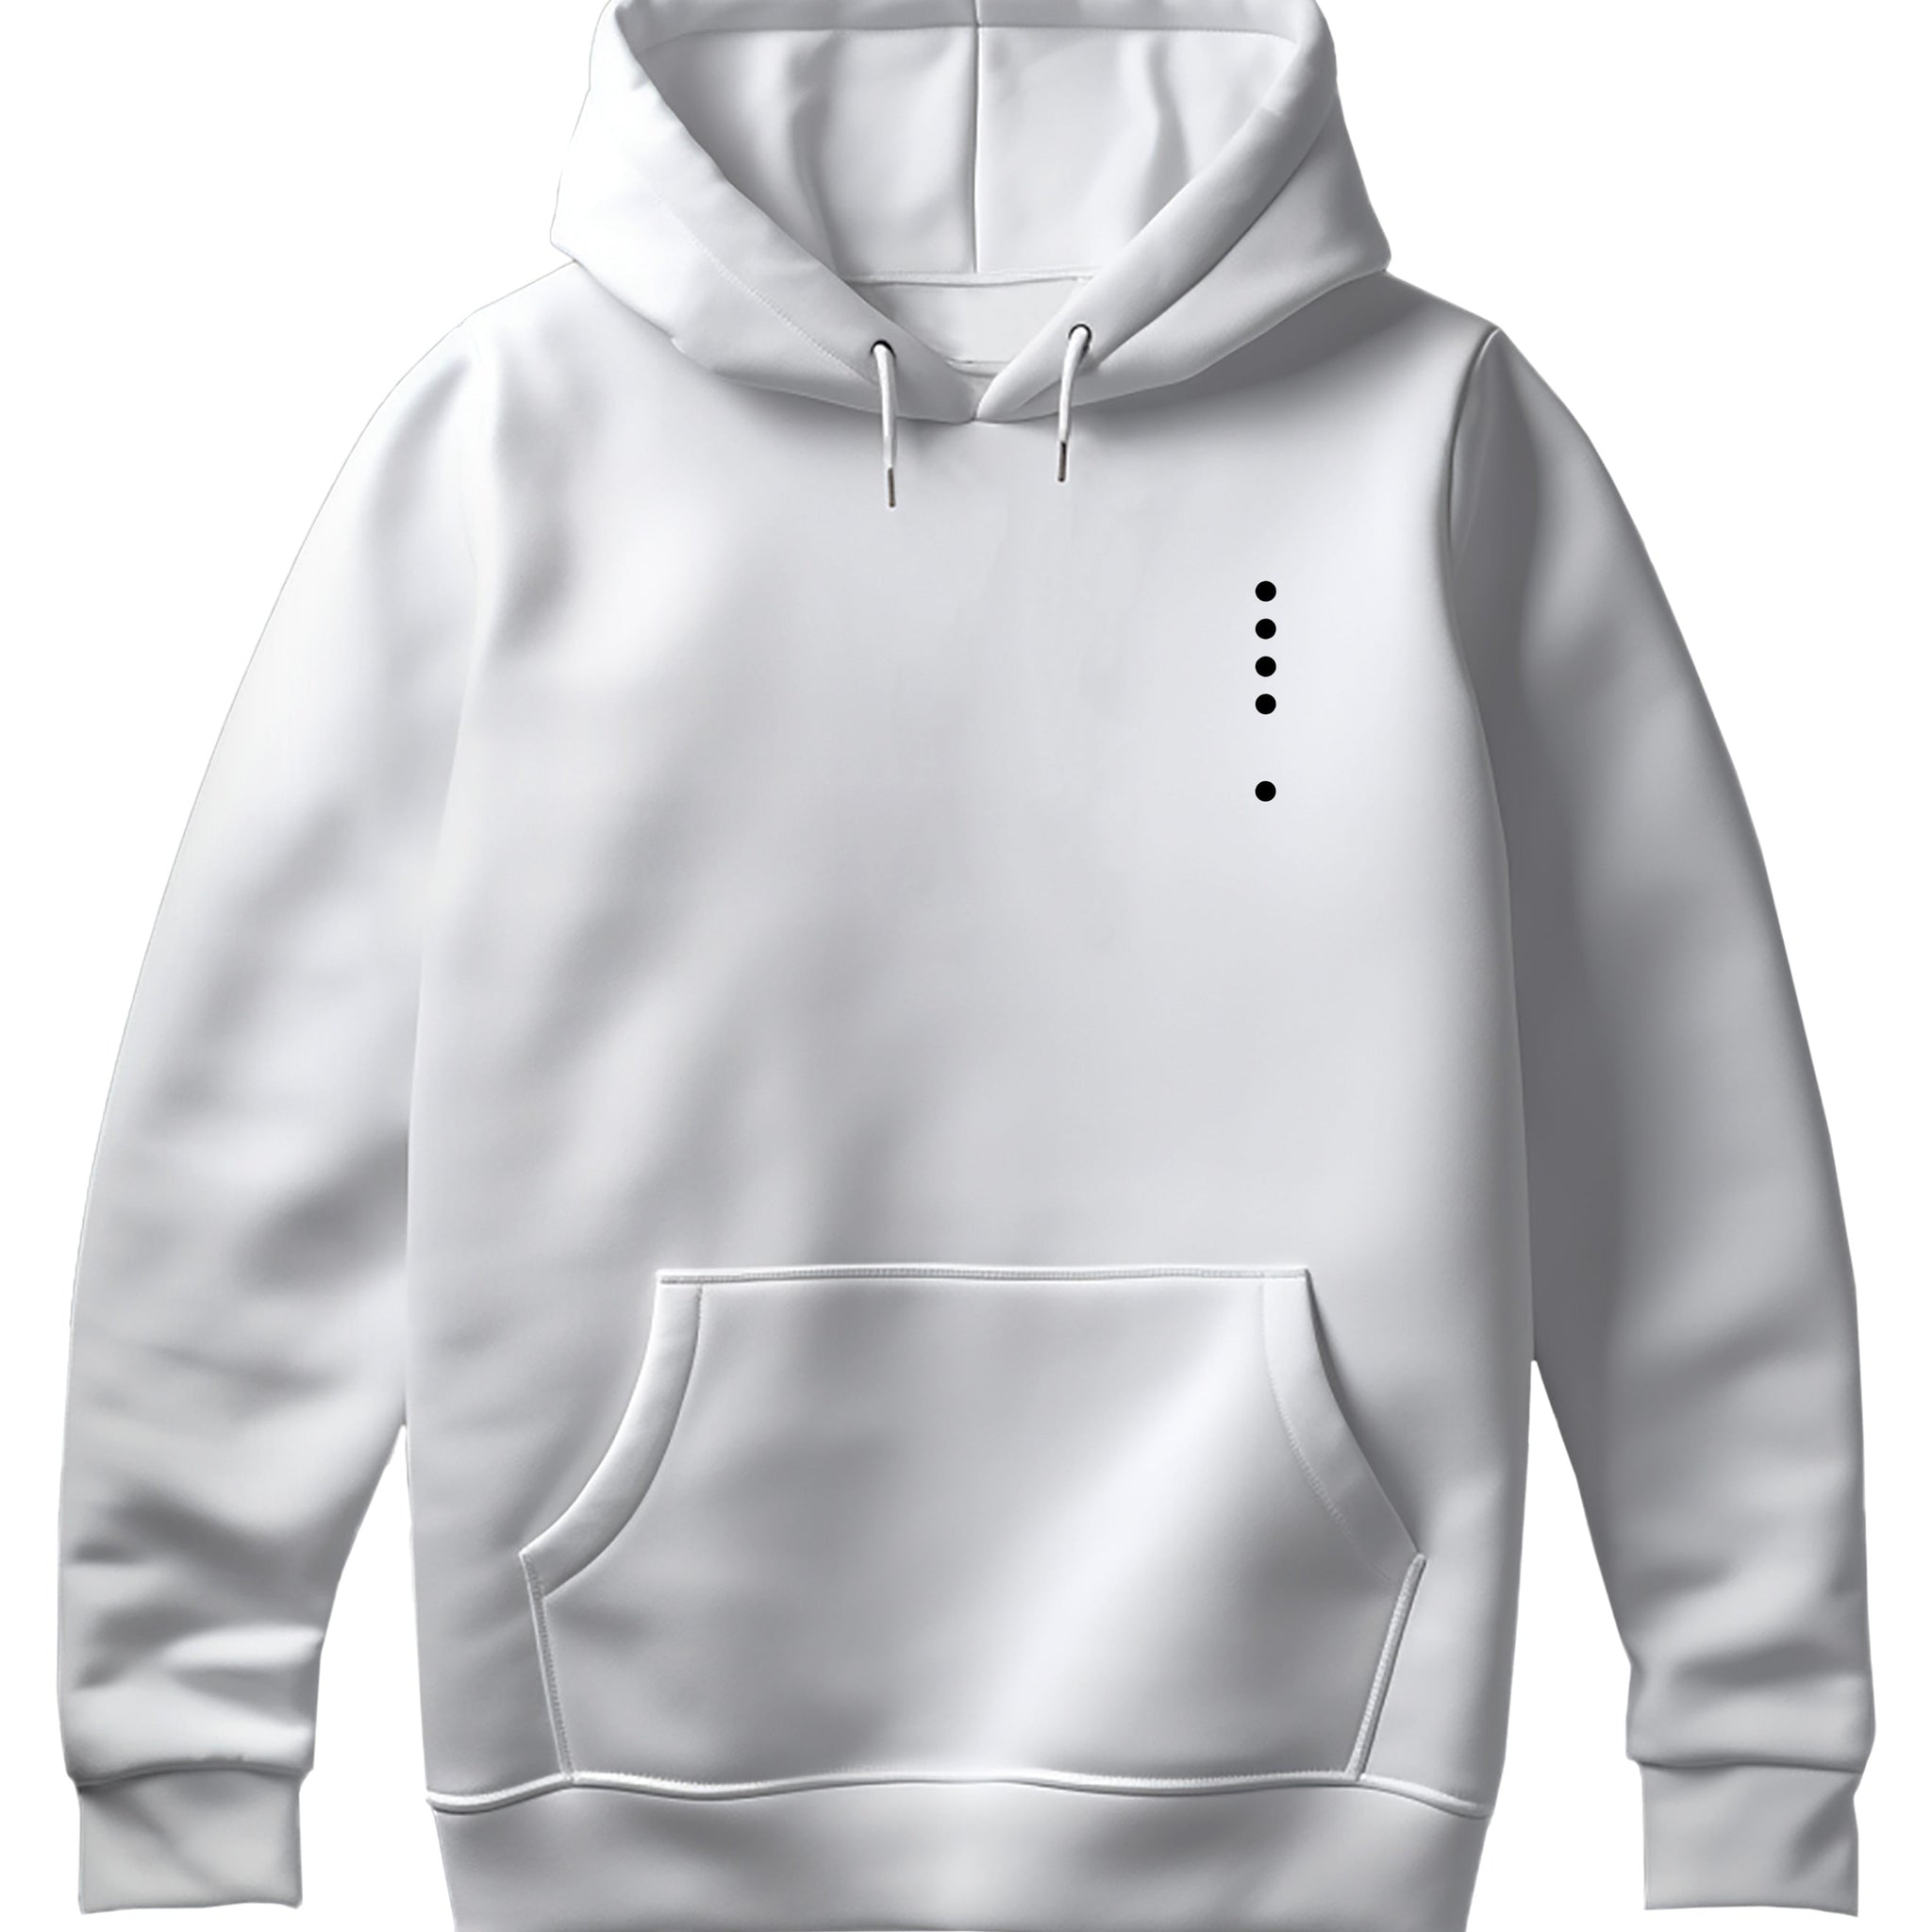 Points Oversize Hoodie